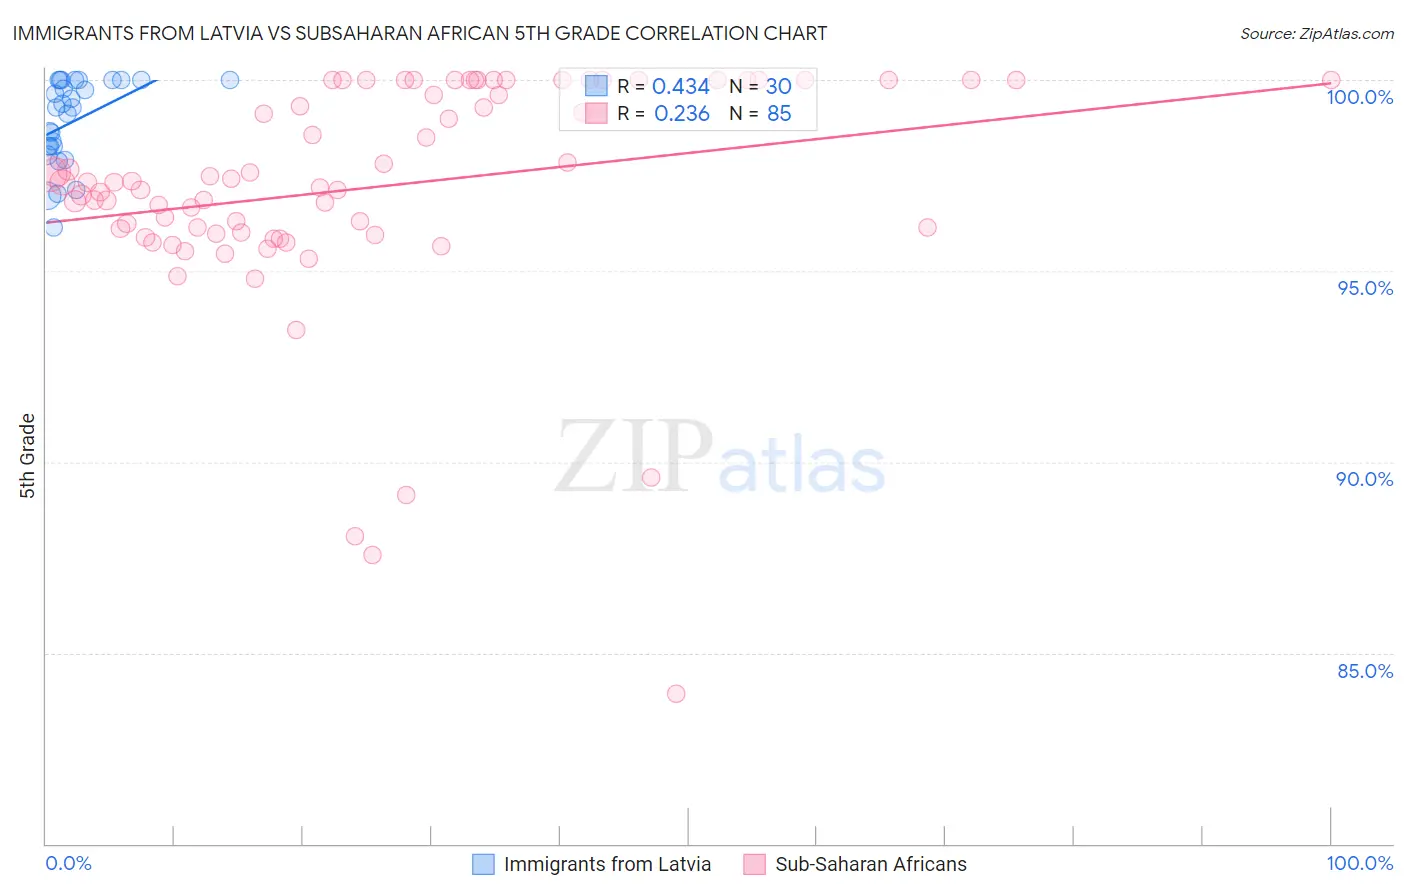 Immigrants from Latvia vs Subsaharan African 5th Grade